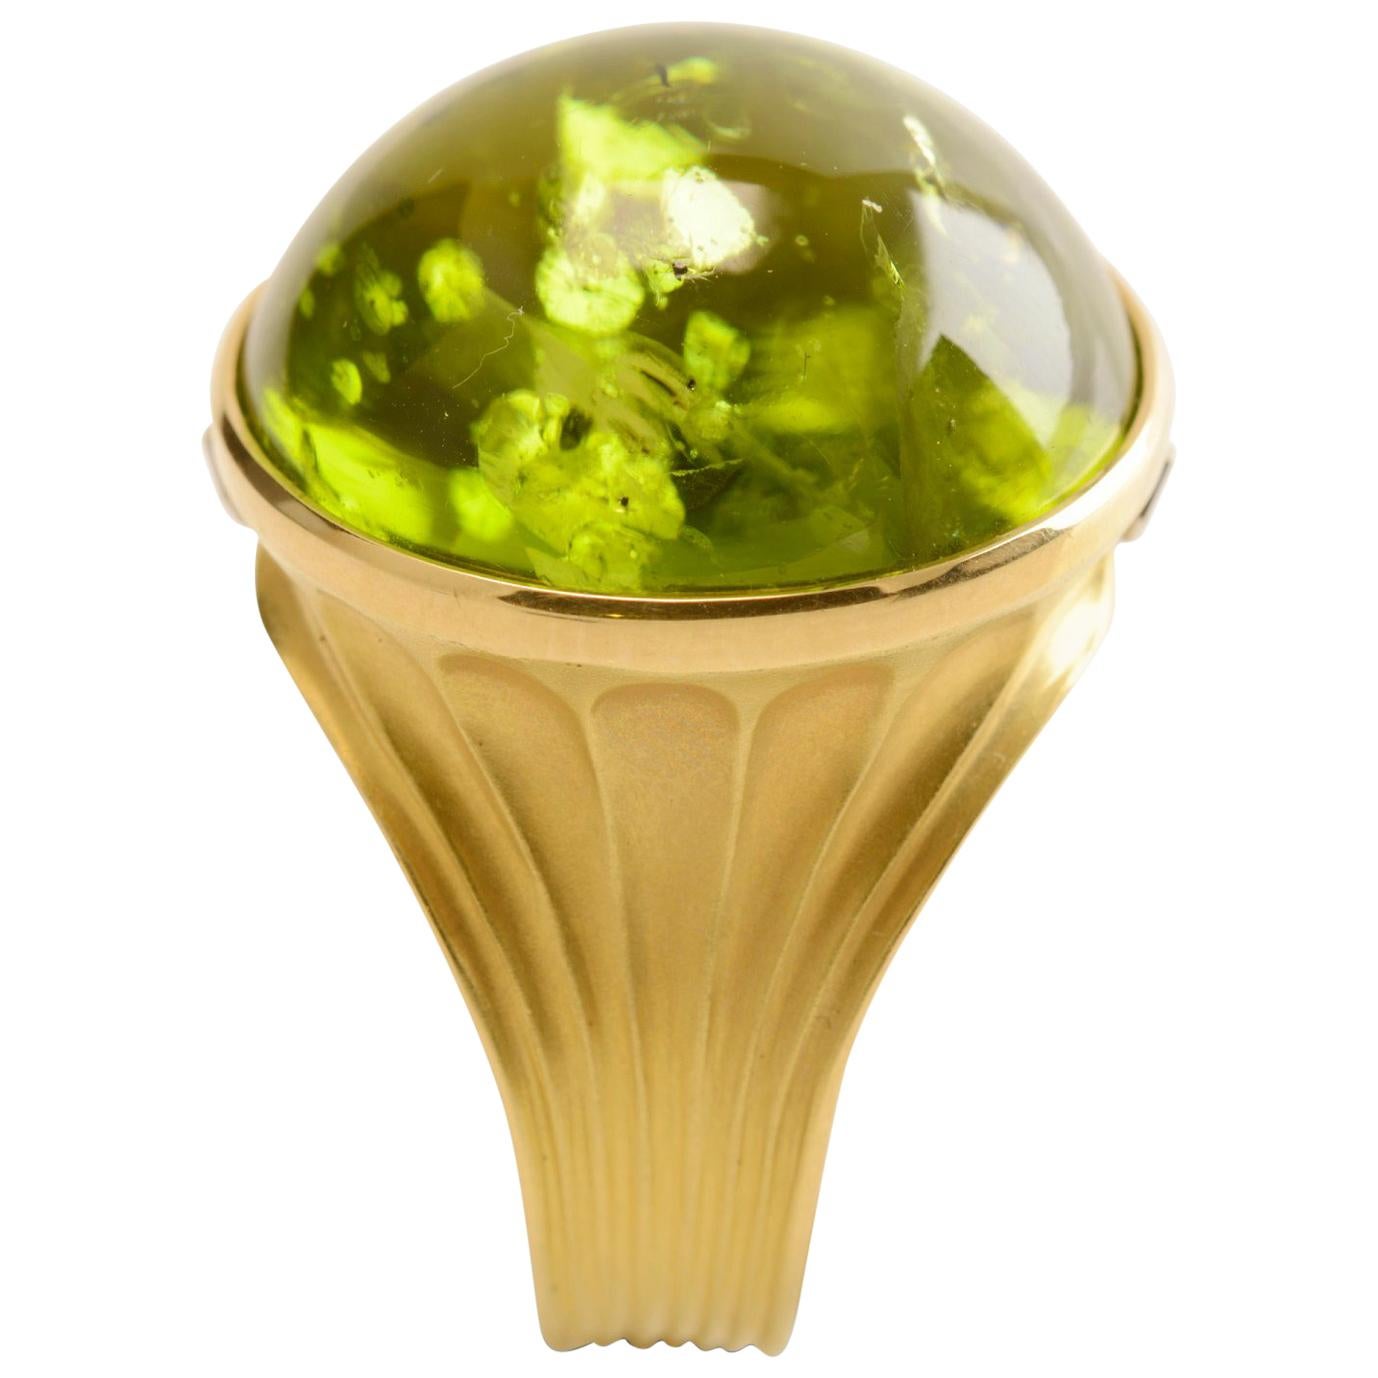 A magnificent peridot cabochon of 38.40 carats sits in an 18 karat yellow gold hand forged setting, a cocktail or dress ring that truly pushes the boundaries of what can be made in gold. The shank is gently concaved from the base and detailed with